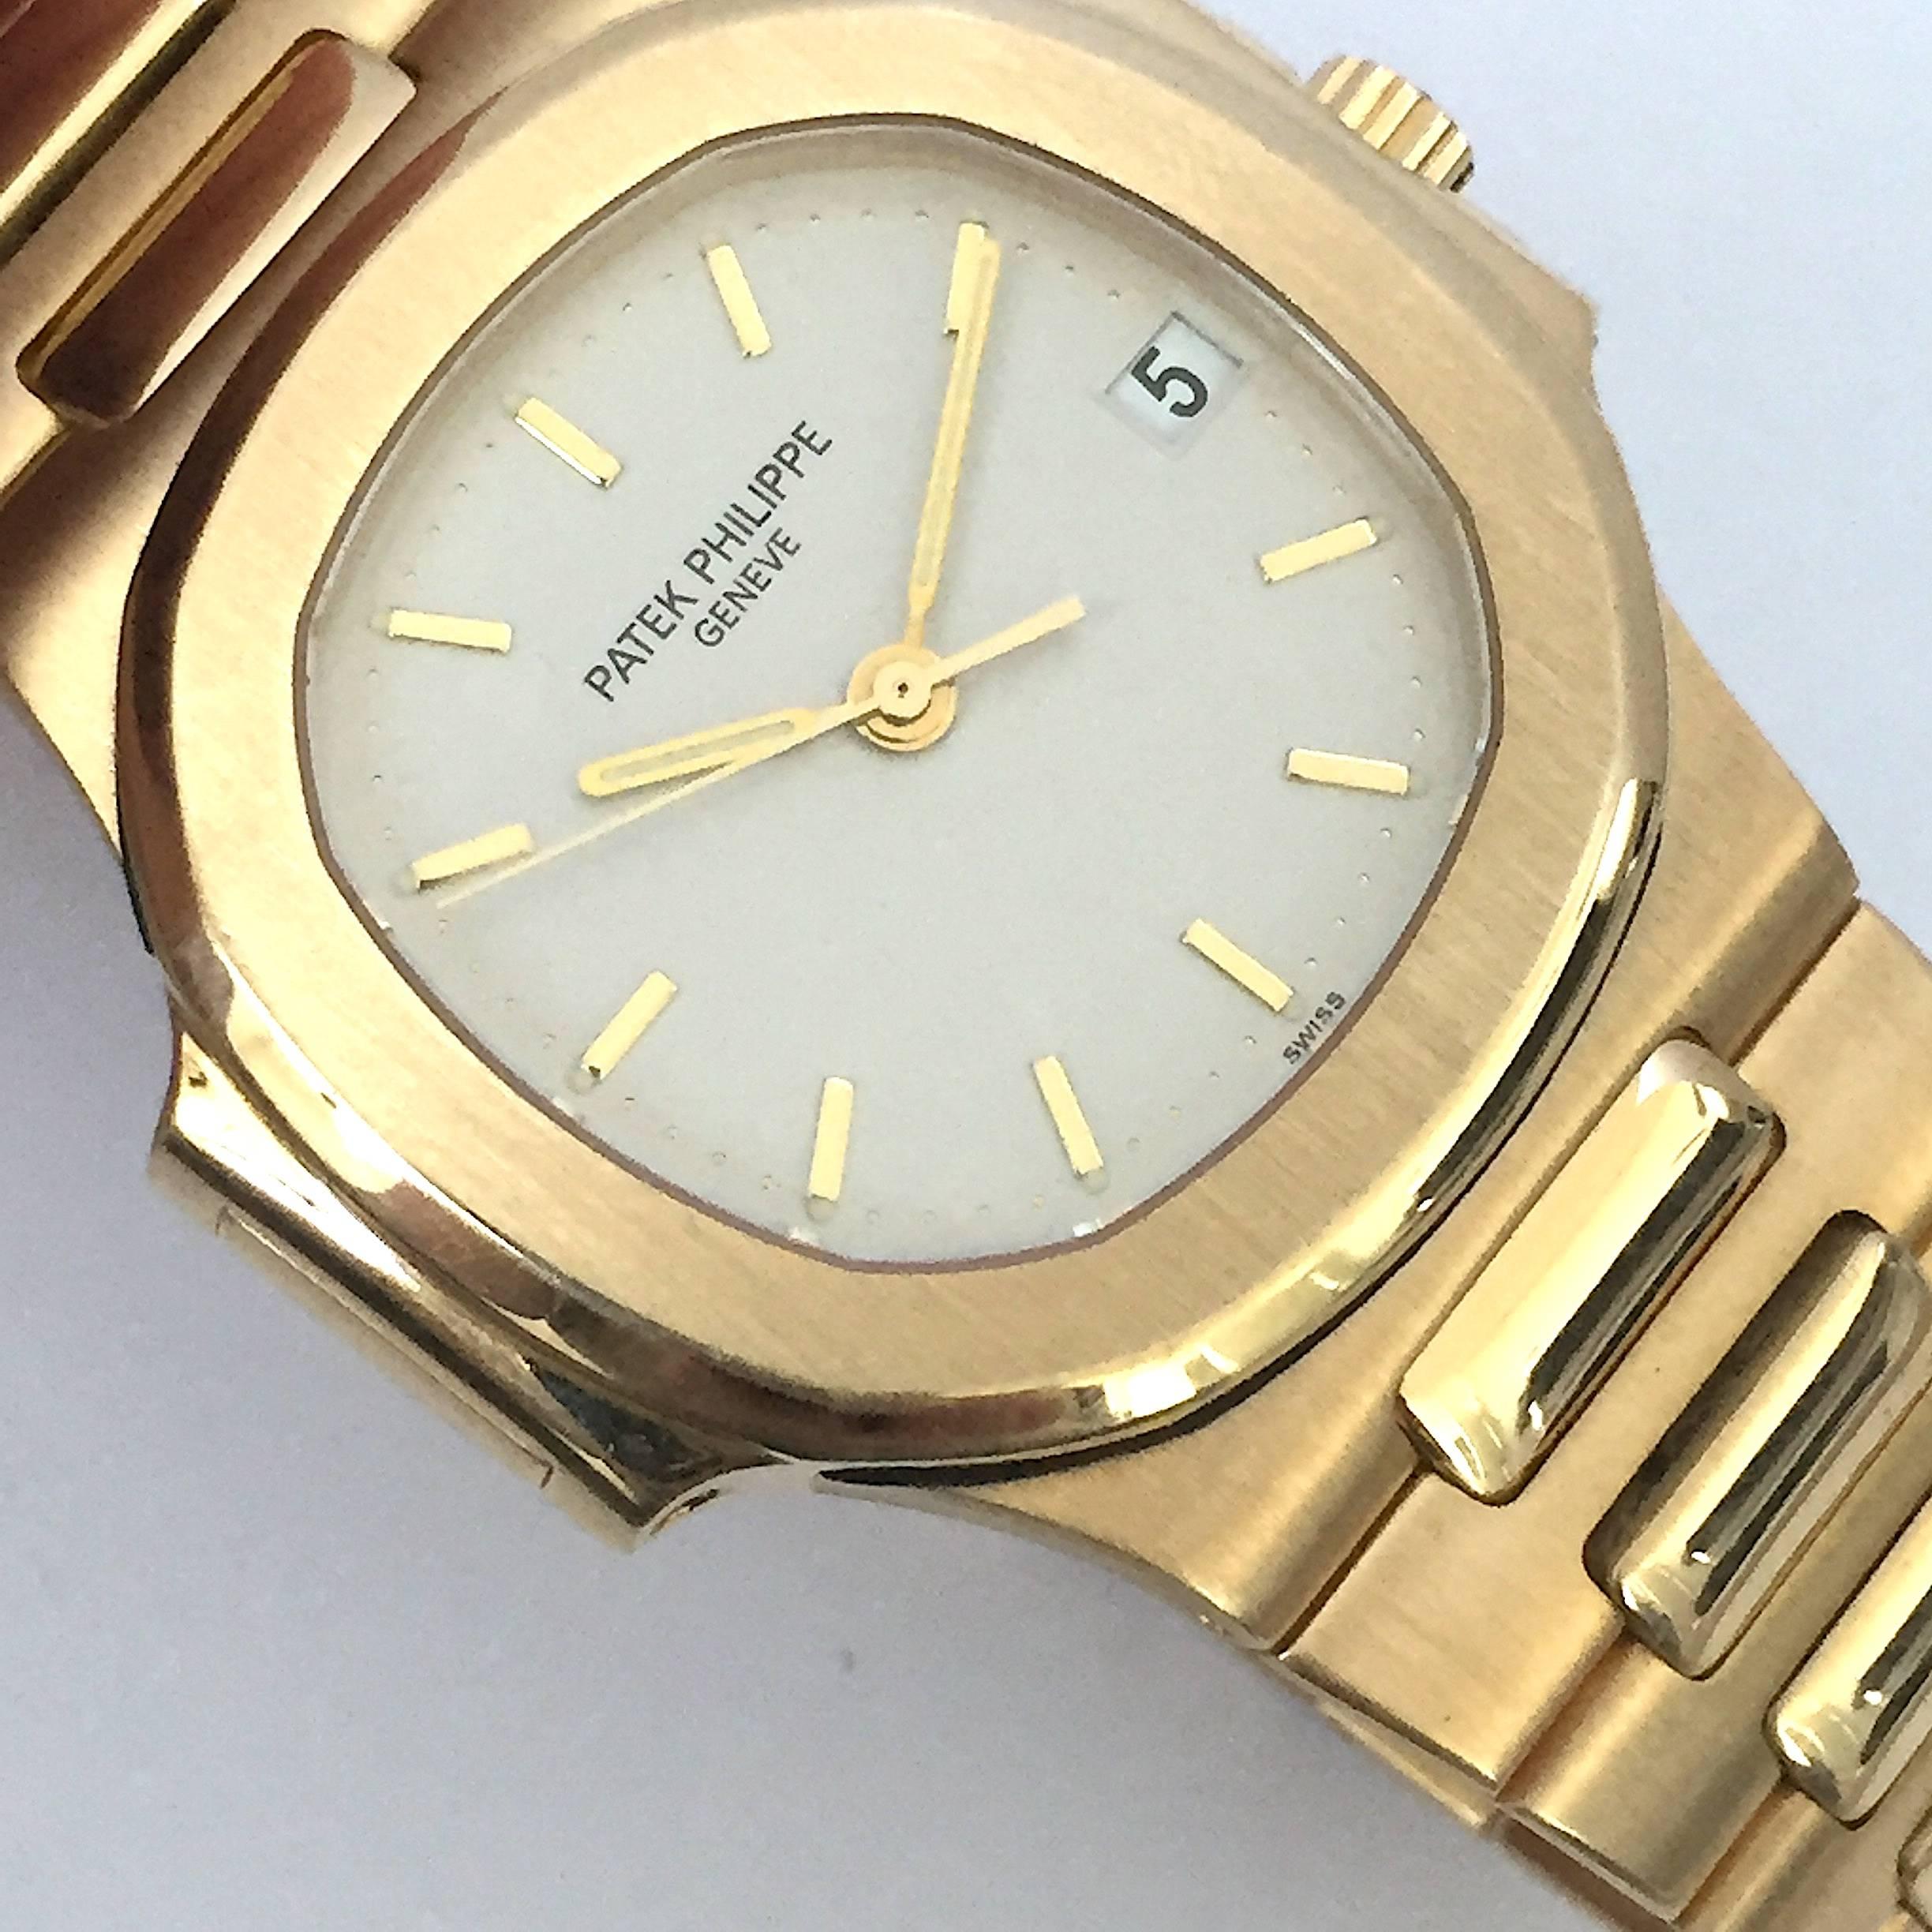 Patek Philippe Yellow Gold Nautilus Automatic Wristwatch, Ref 3800 In Excellent Condition For Sale In New York, NY